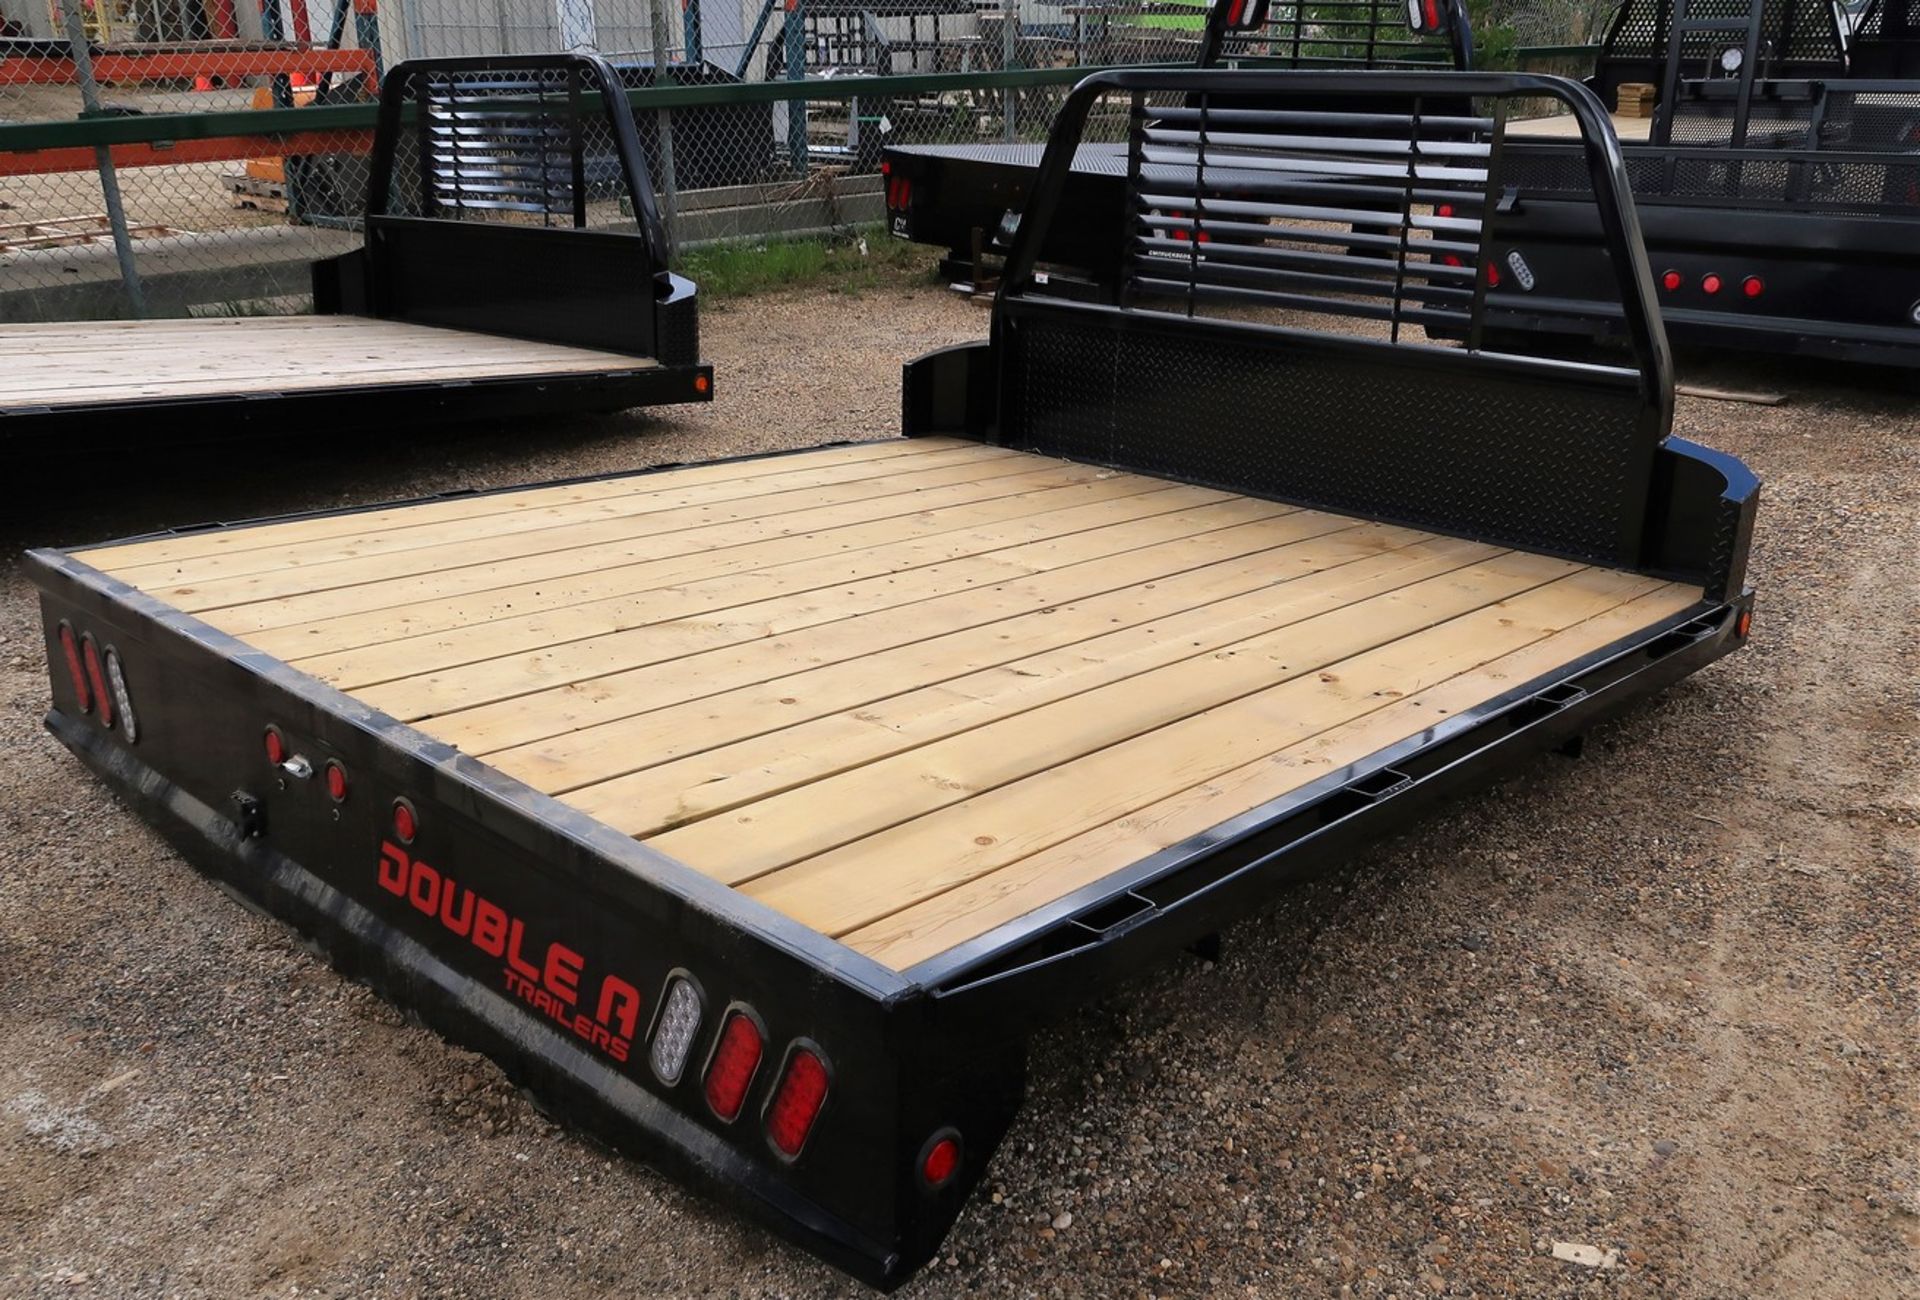 2019 DOUBLE A TRUCK DECK, BOX OFF, 8.5' DECK WOOD DECKING, S/N 2DATDOK1047 - Image 2 of 3